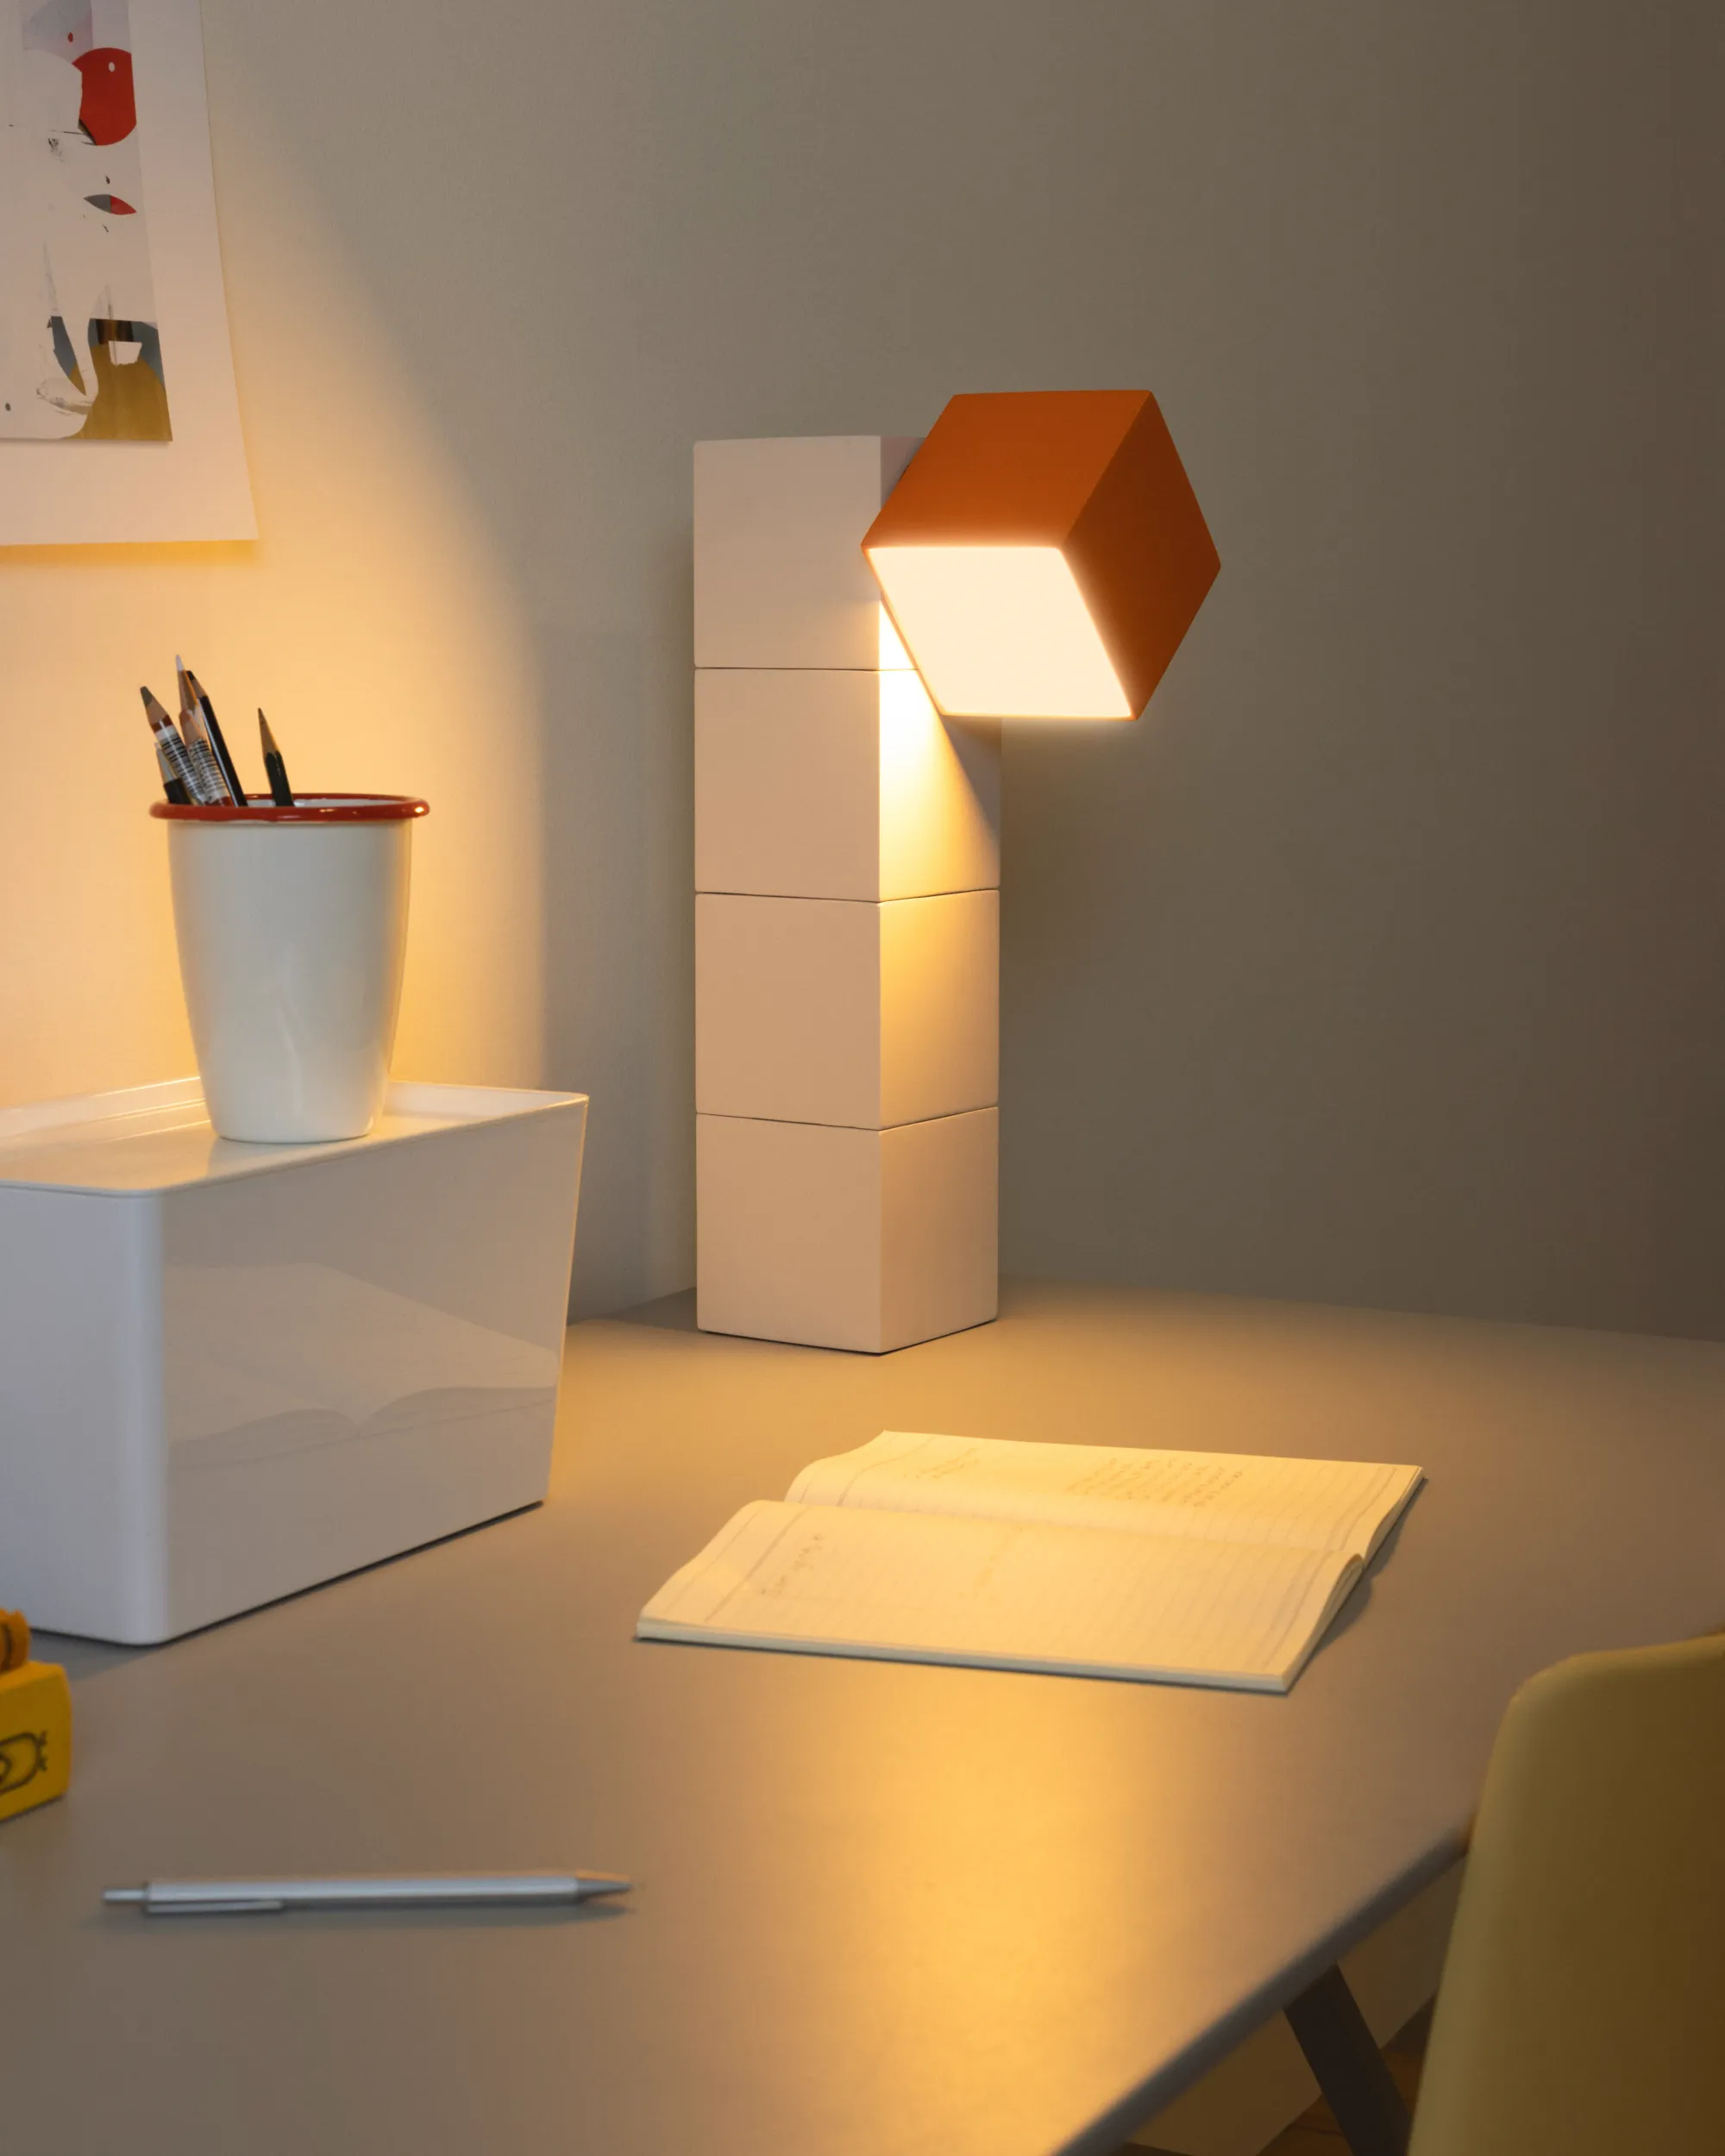 Gantri’s Analog Task Light is illuminating a home office table with an open journal and a penholder filled with pencils